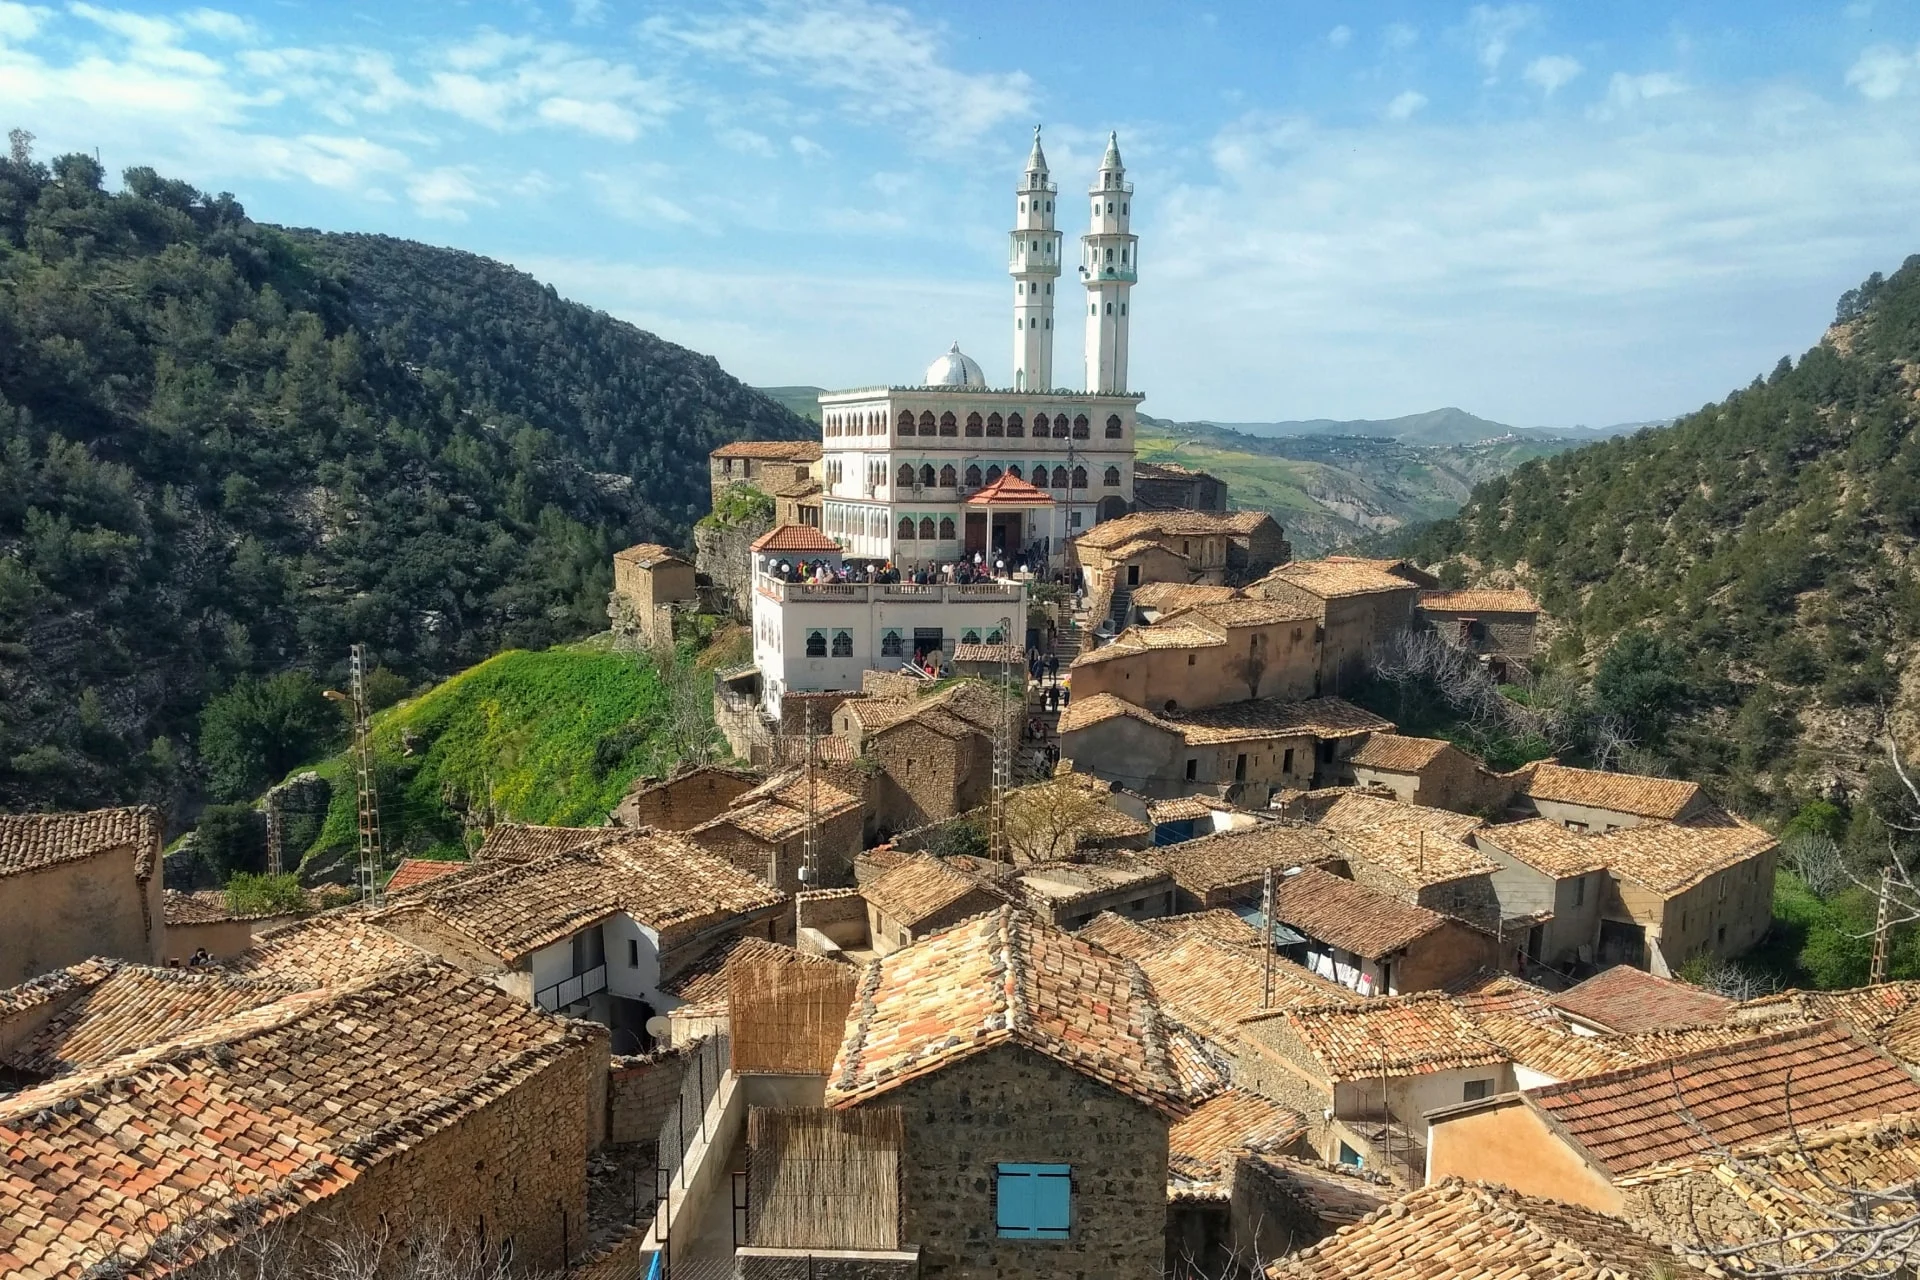 A village in the mountains with a mosque in the background.